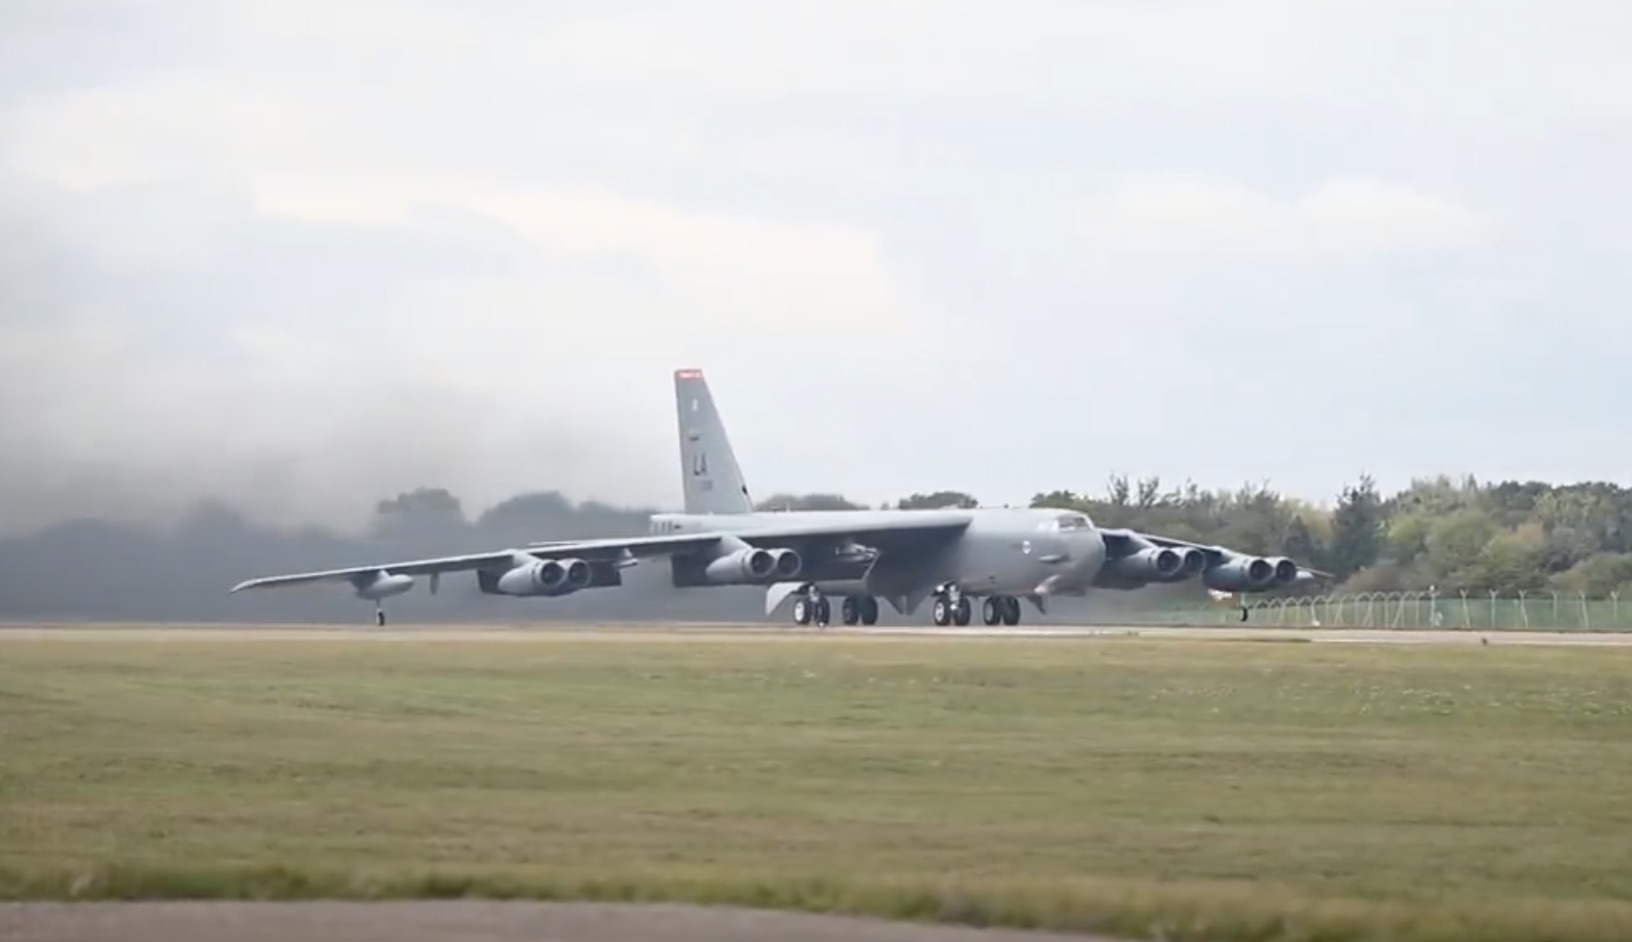 Best of 2020: Boeing B-52 Stratofortress On Takeoff From The Cockpit